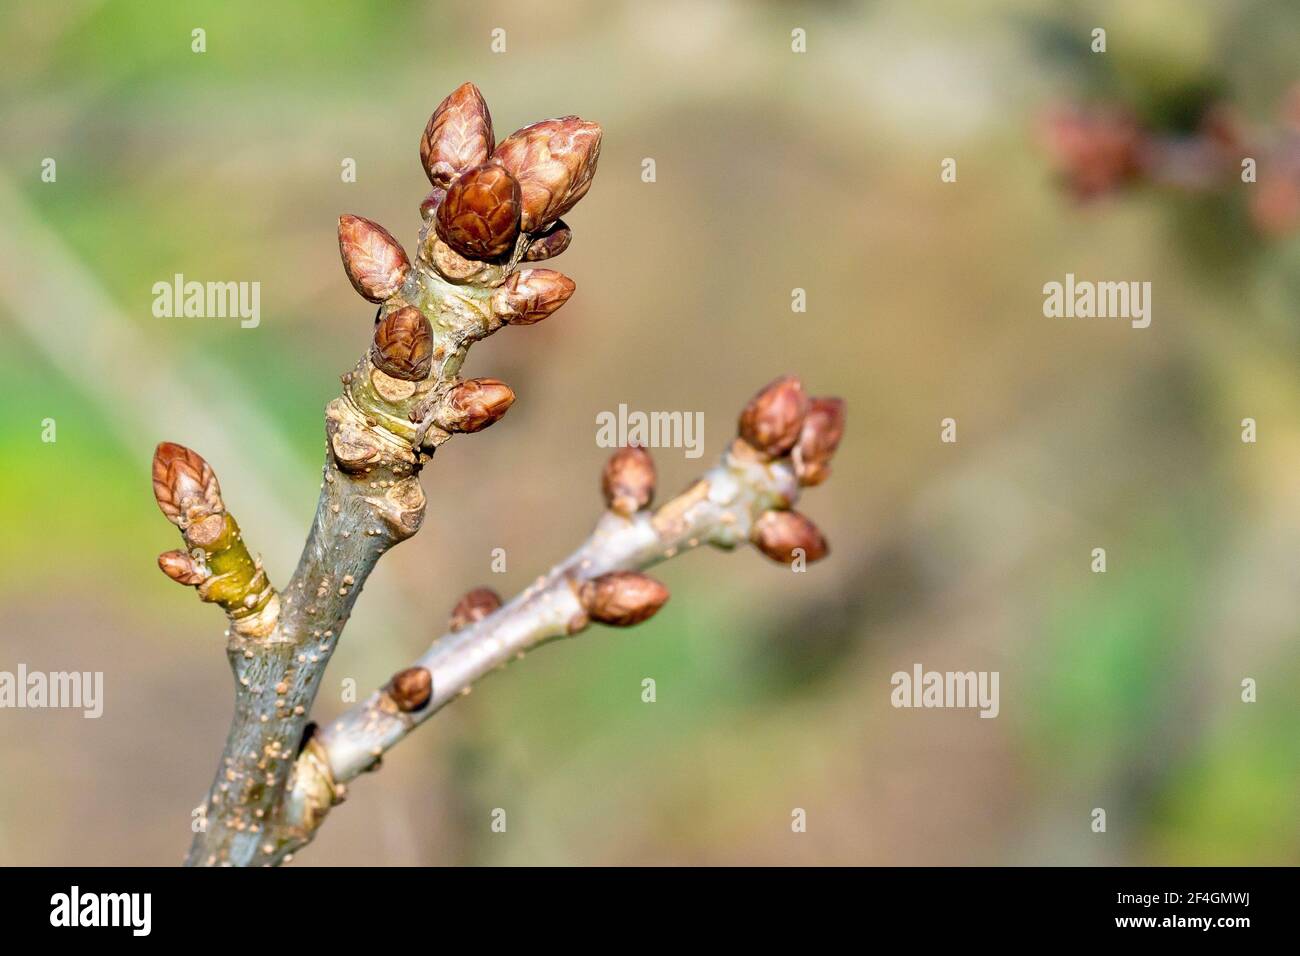 English Oak leaf buds (quercus robur), also known as Pedunculate Oak, close up showing a cluster of buds at the end of a branch. Stock Photo